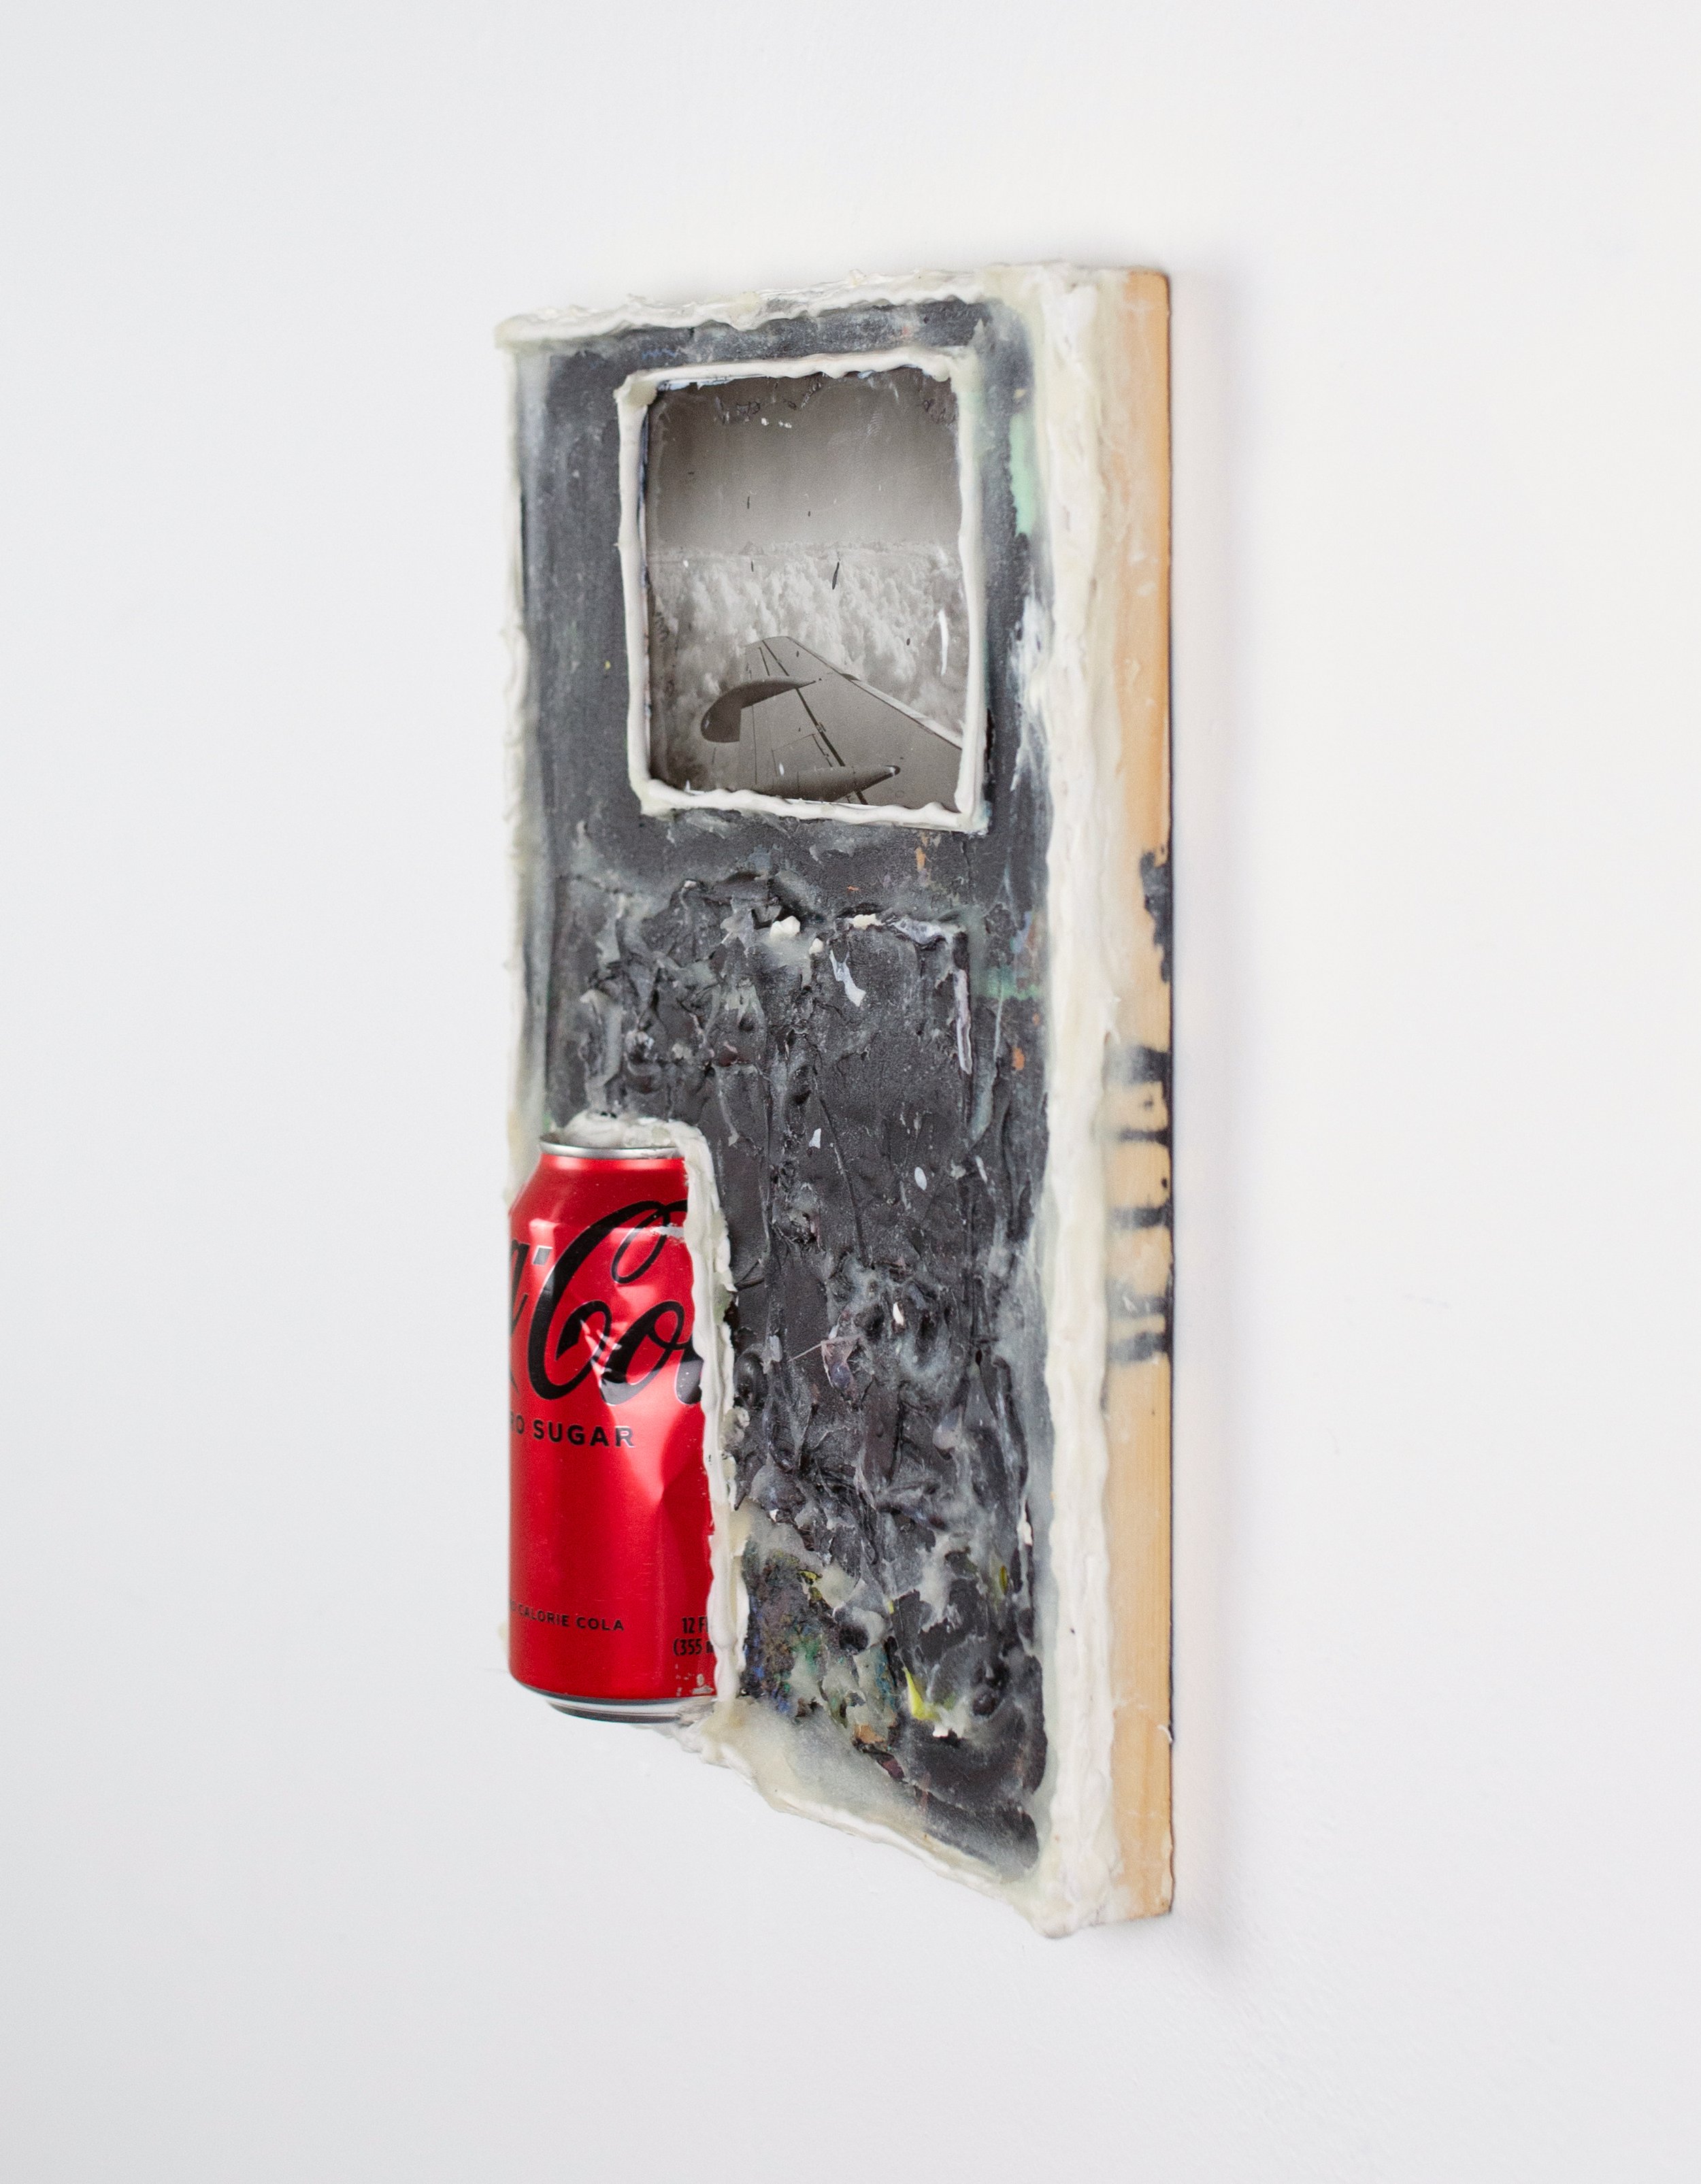  Somewhere Over The Amazon  Oil, acrylic, Sumi ink, family photograph, caulk, cold wax, Coke Zero can mounted on panel   12 x 9 in.  